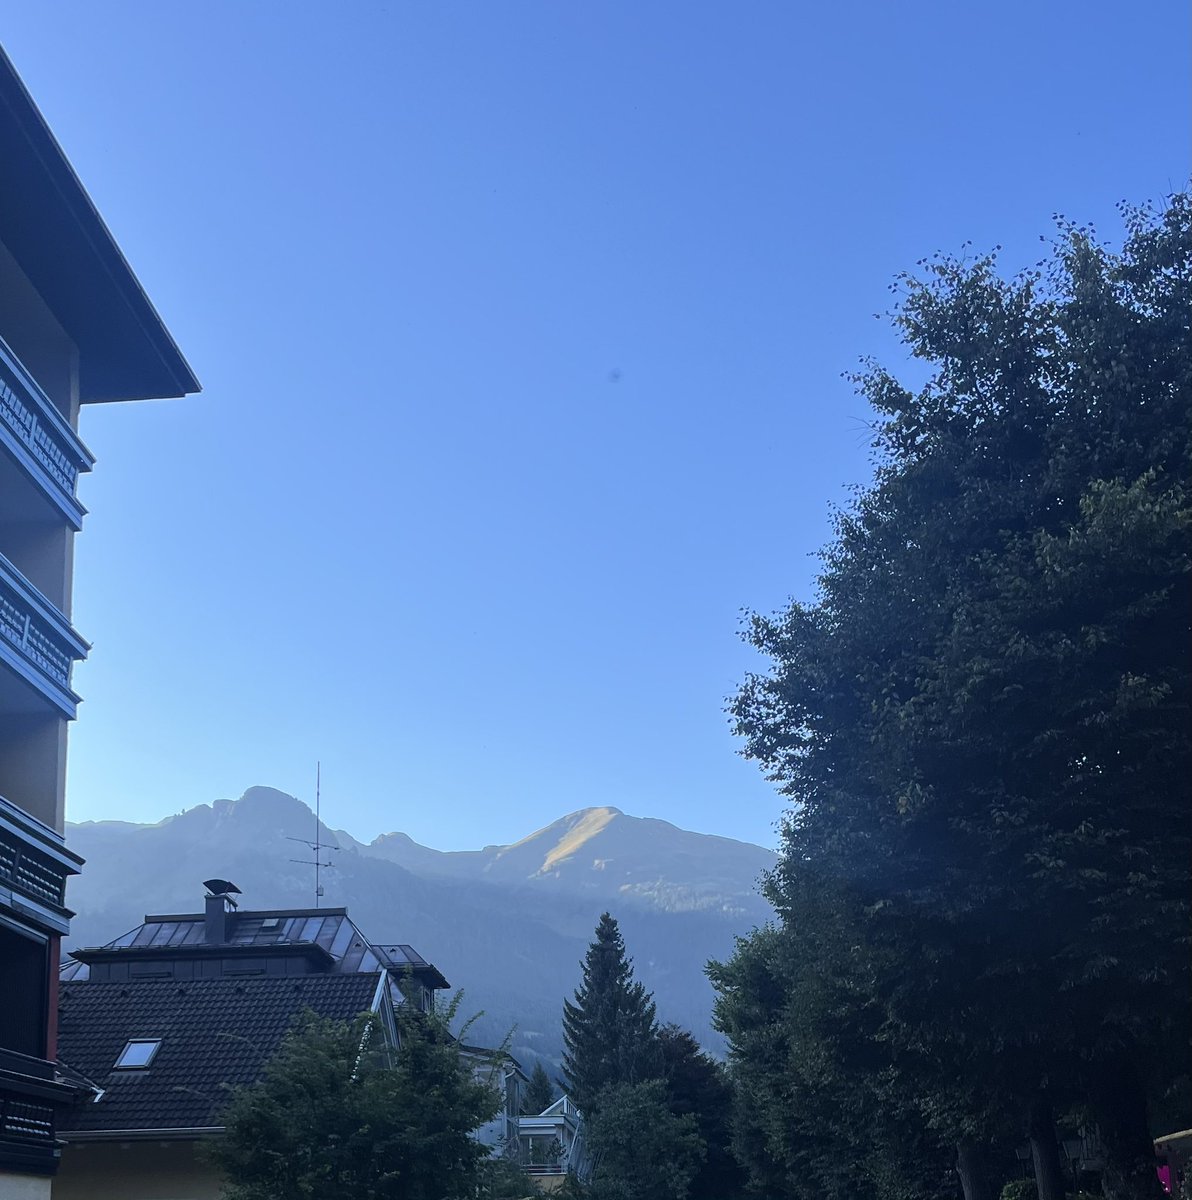 That Gastein feeling… looking forward to #EHFG2023 and many amazing points & peaks. Will likely find insights & ideas on #futurehealth, #amr, #dementia, #healthdata, #wellbeingeconomy, #obesity, #healthliteracy, #selfcare, #digitalhealth, #mentalhealth, & more from great minds.